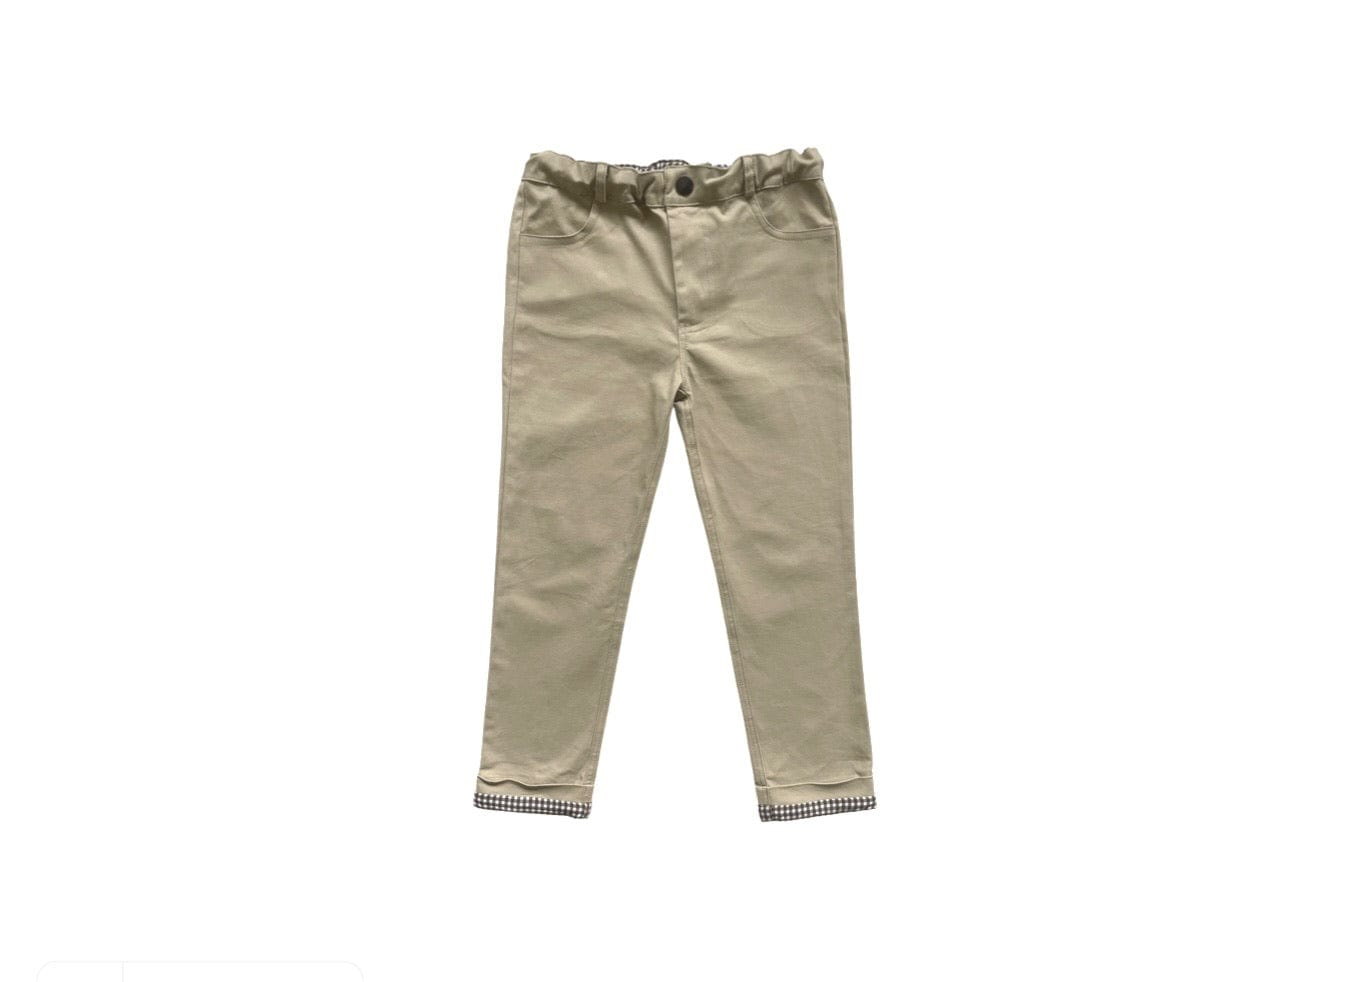 Ted chinos- Now up to Size 10